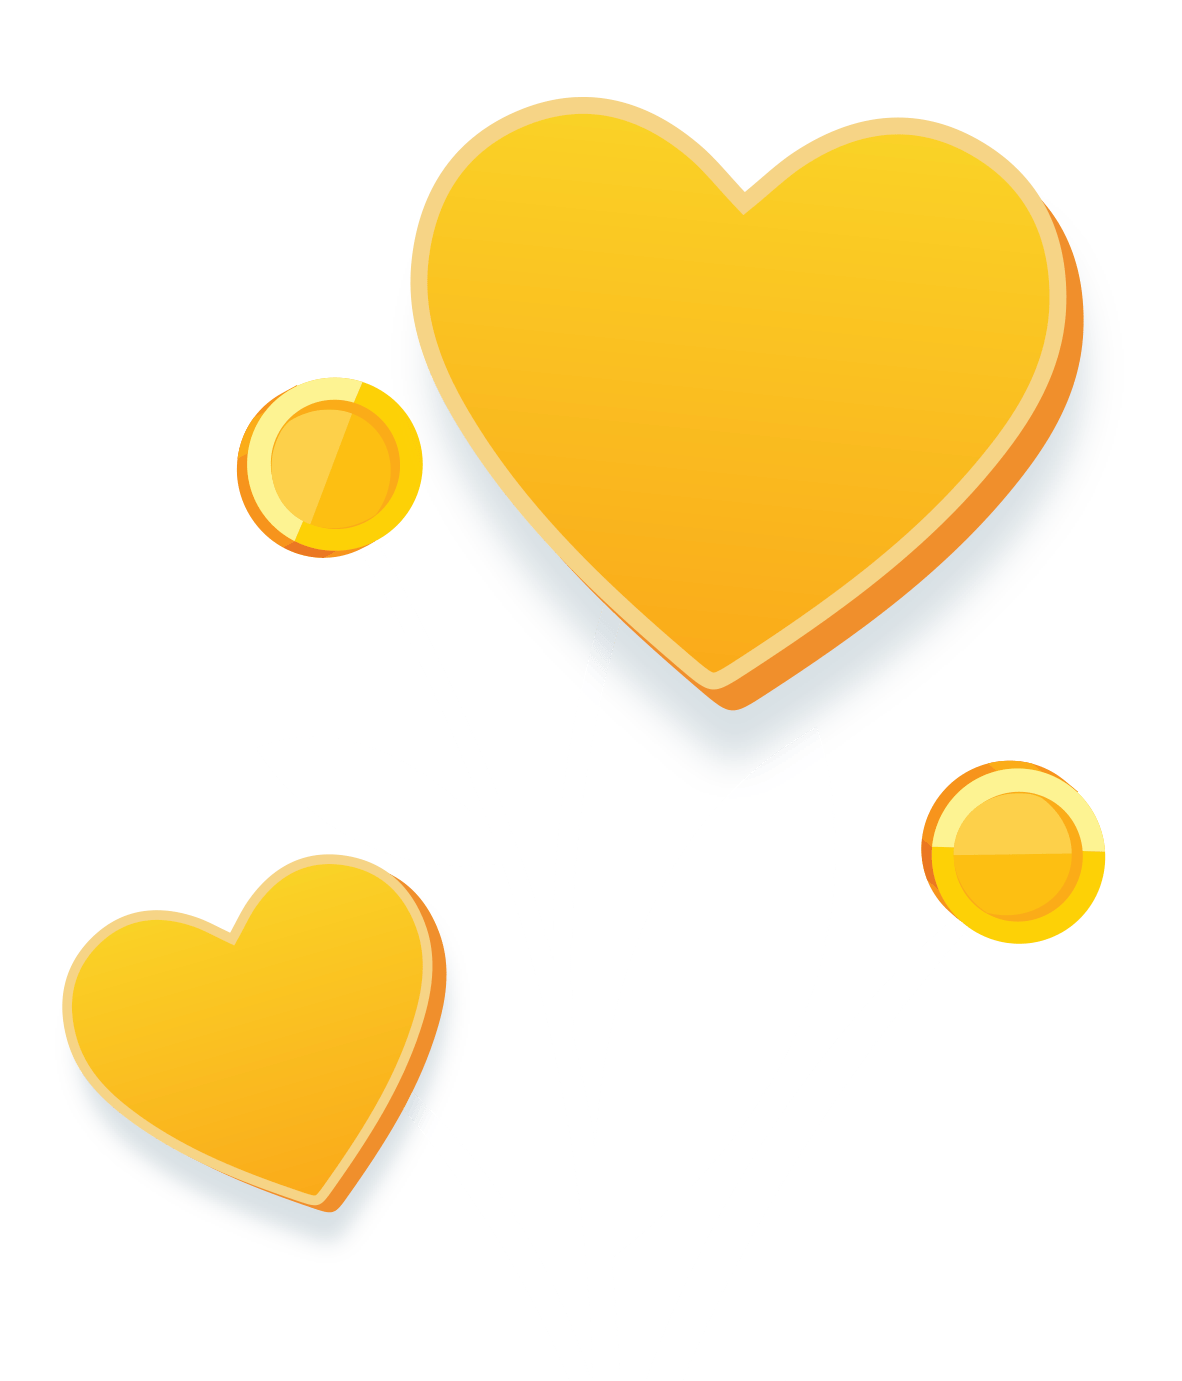 Growing Hearts | The Giving Block